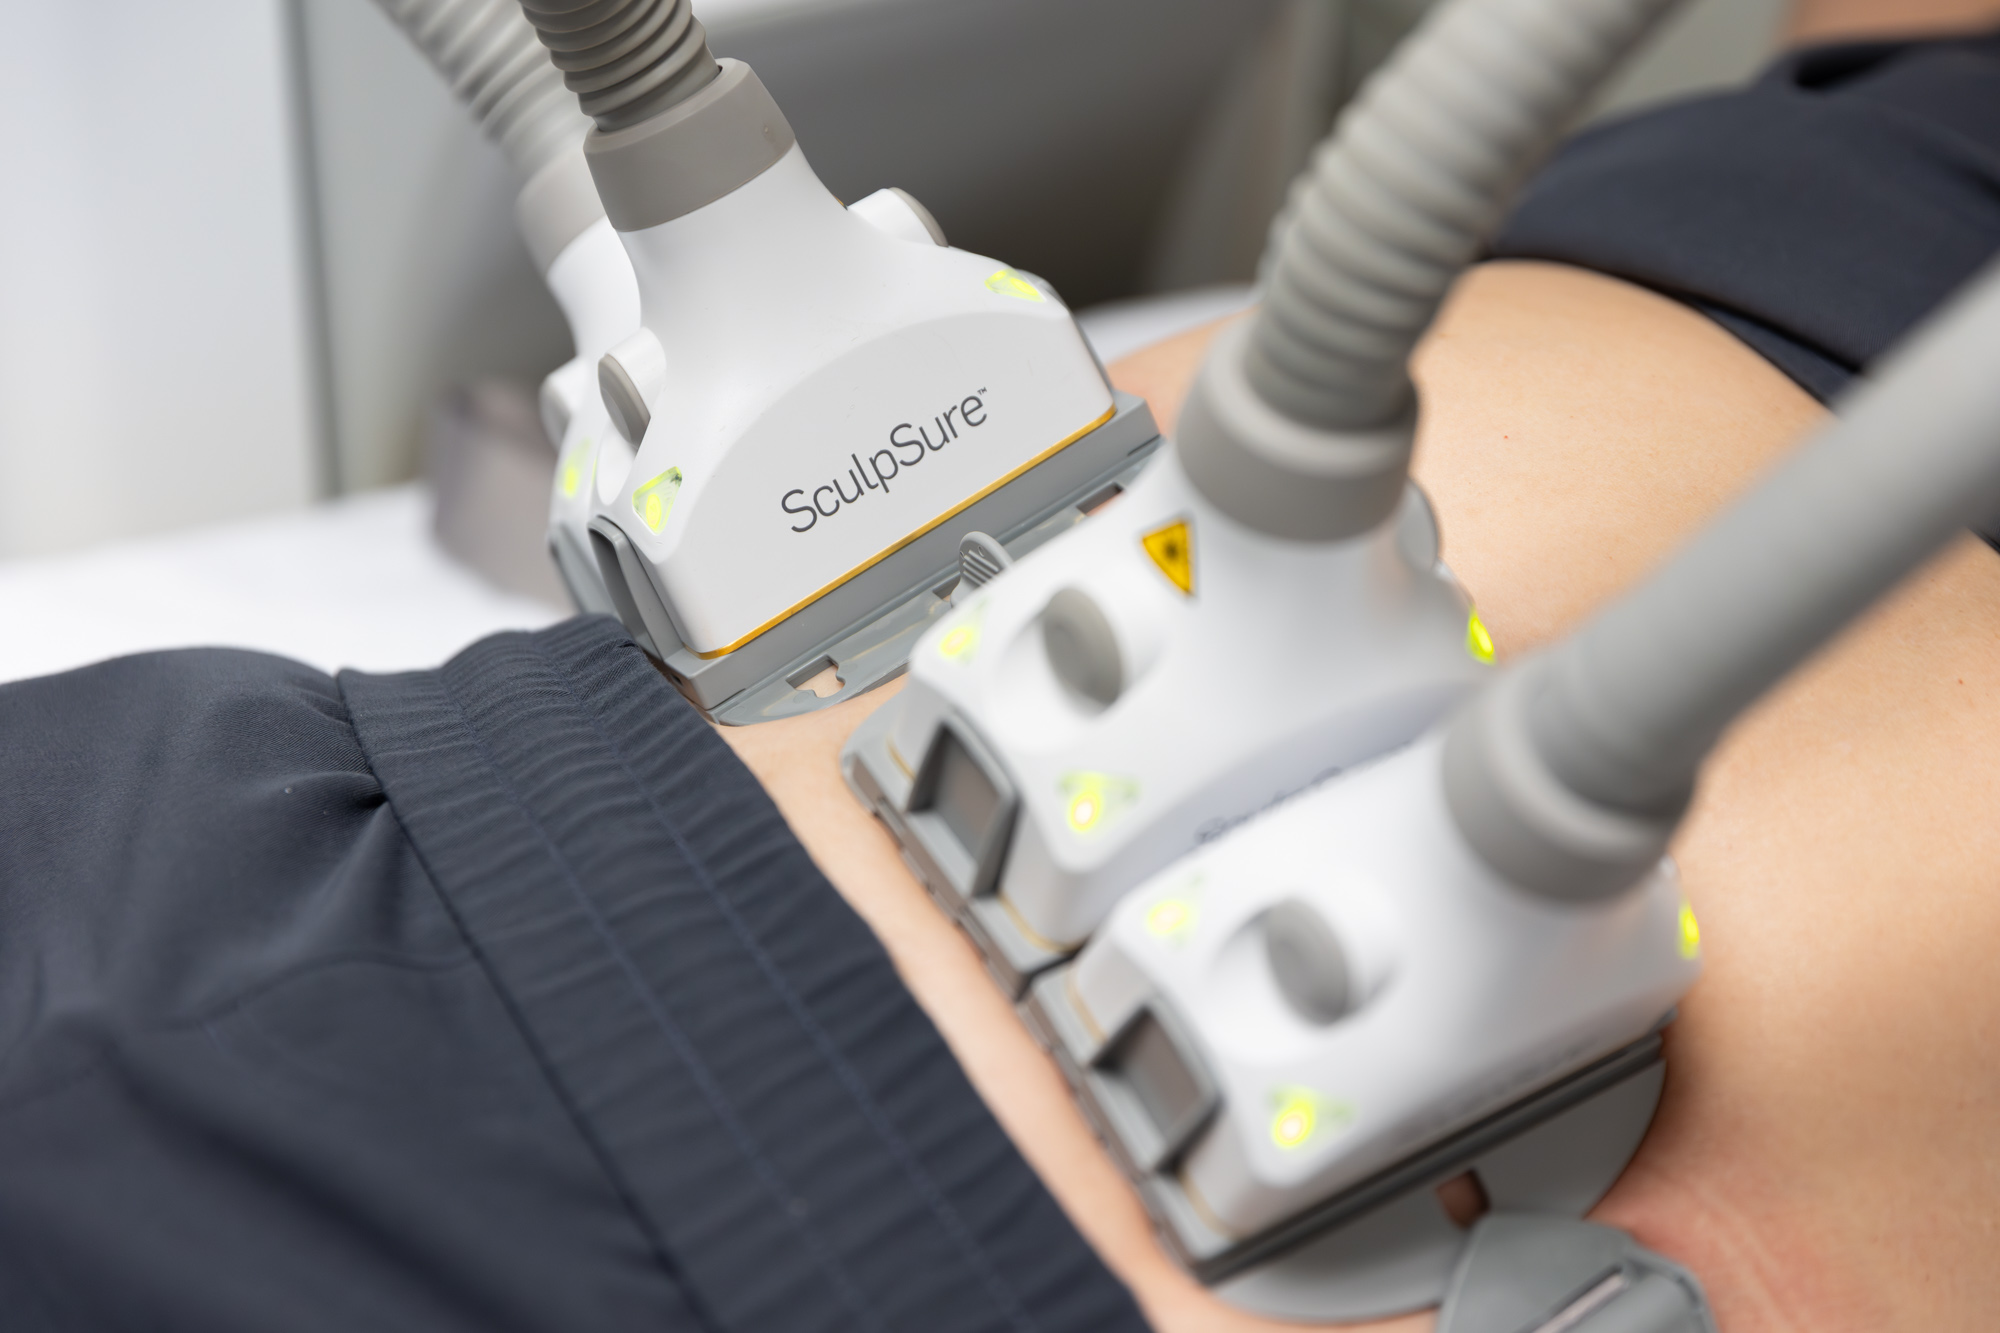 SculpSure performing body shaping in Memphis,TN